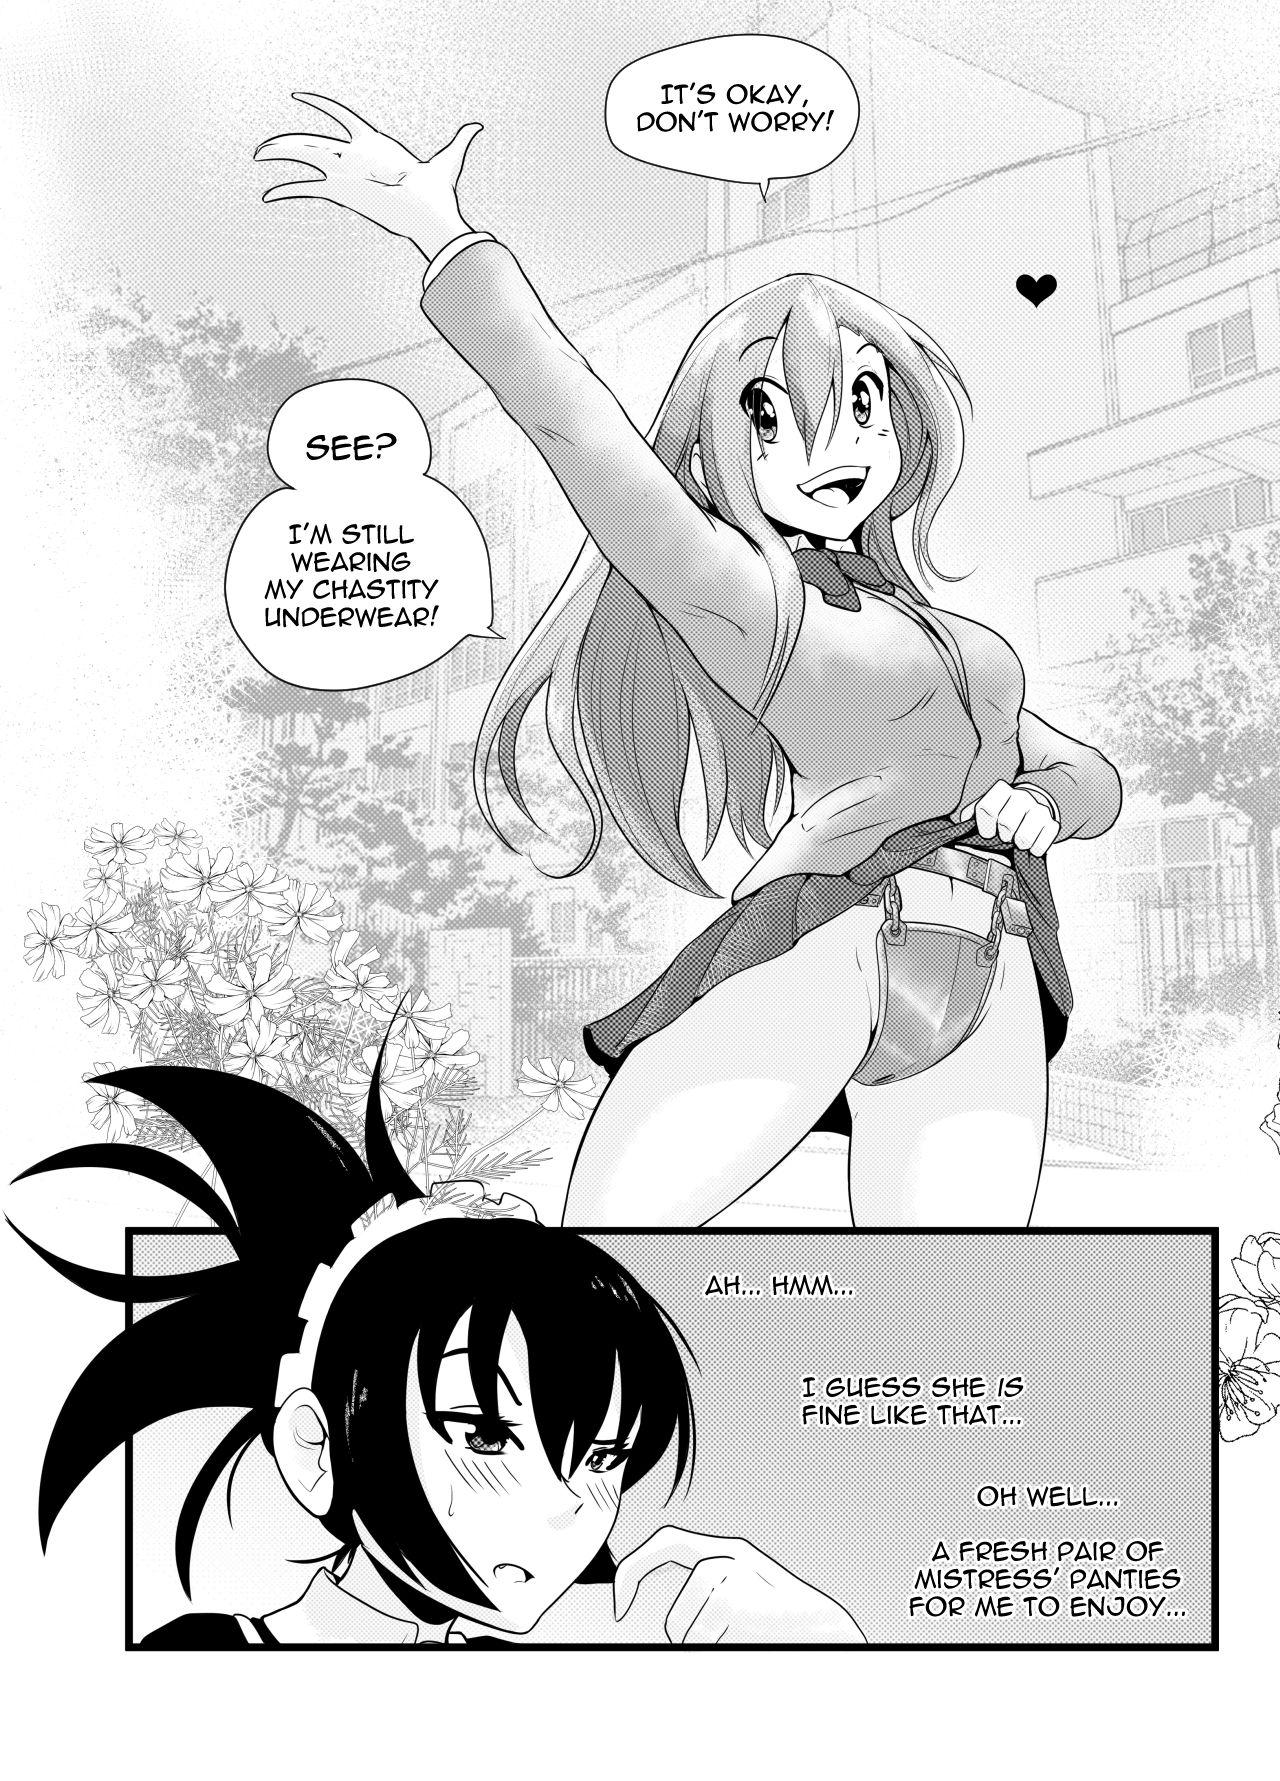 Oriental I Was Caught Masturbating by My Maid and She Locked Me in a Chastity Belt! - Seitokai yakuindomo Morocha - Page 12